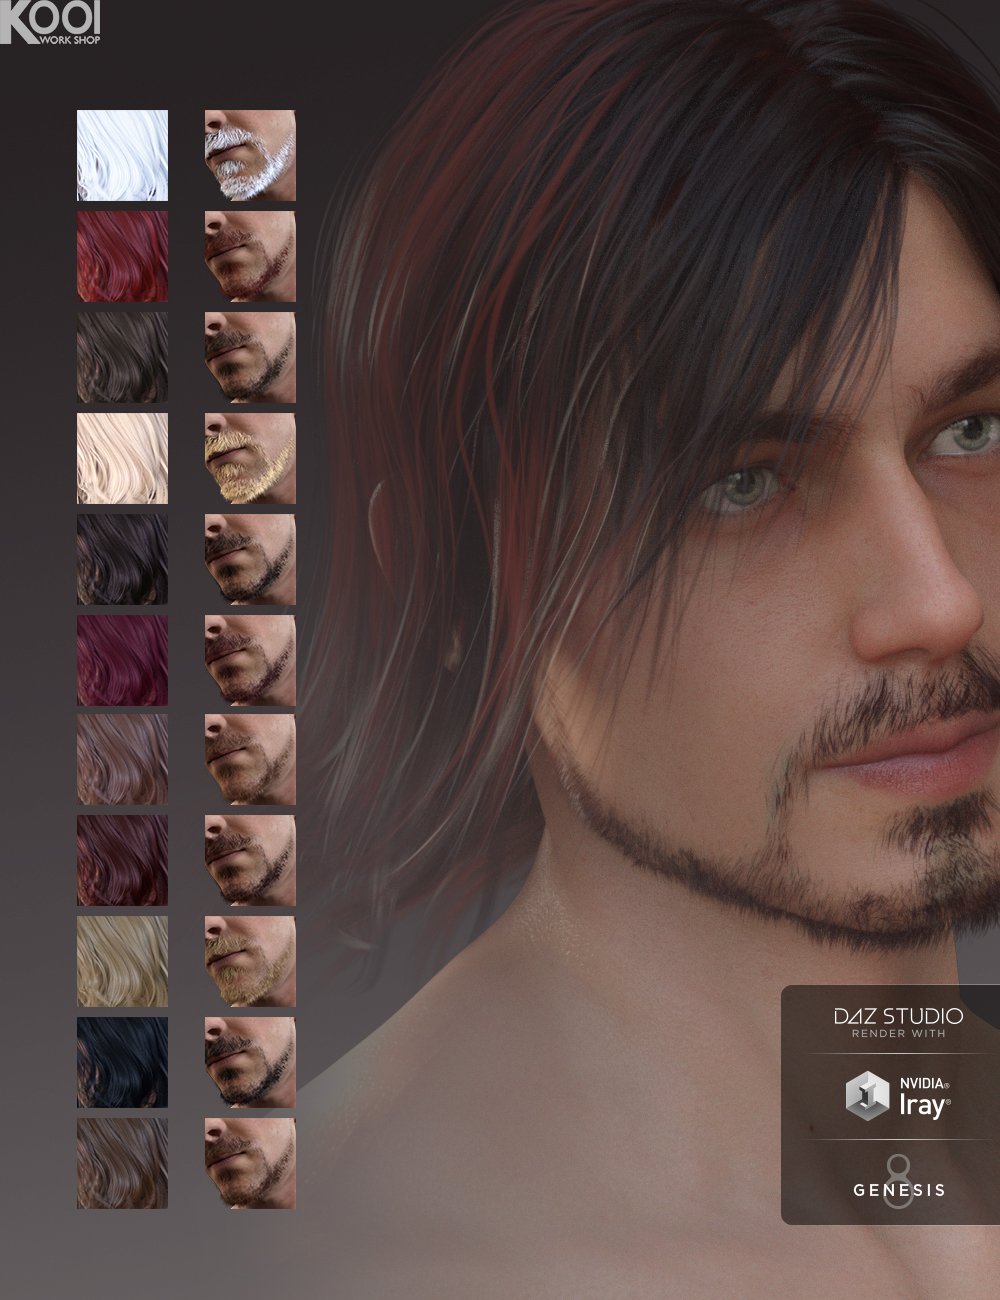 Willis Hair and Beard for Genesis 3 and 8 Male(s) by: Kool, 3D Models by Daz 3D